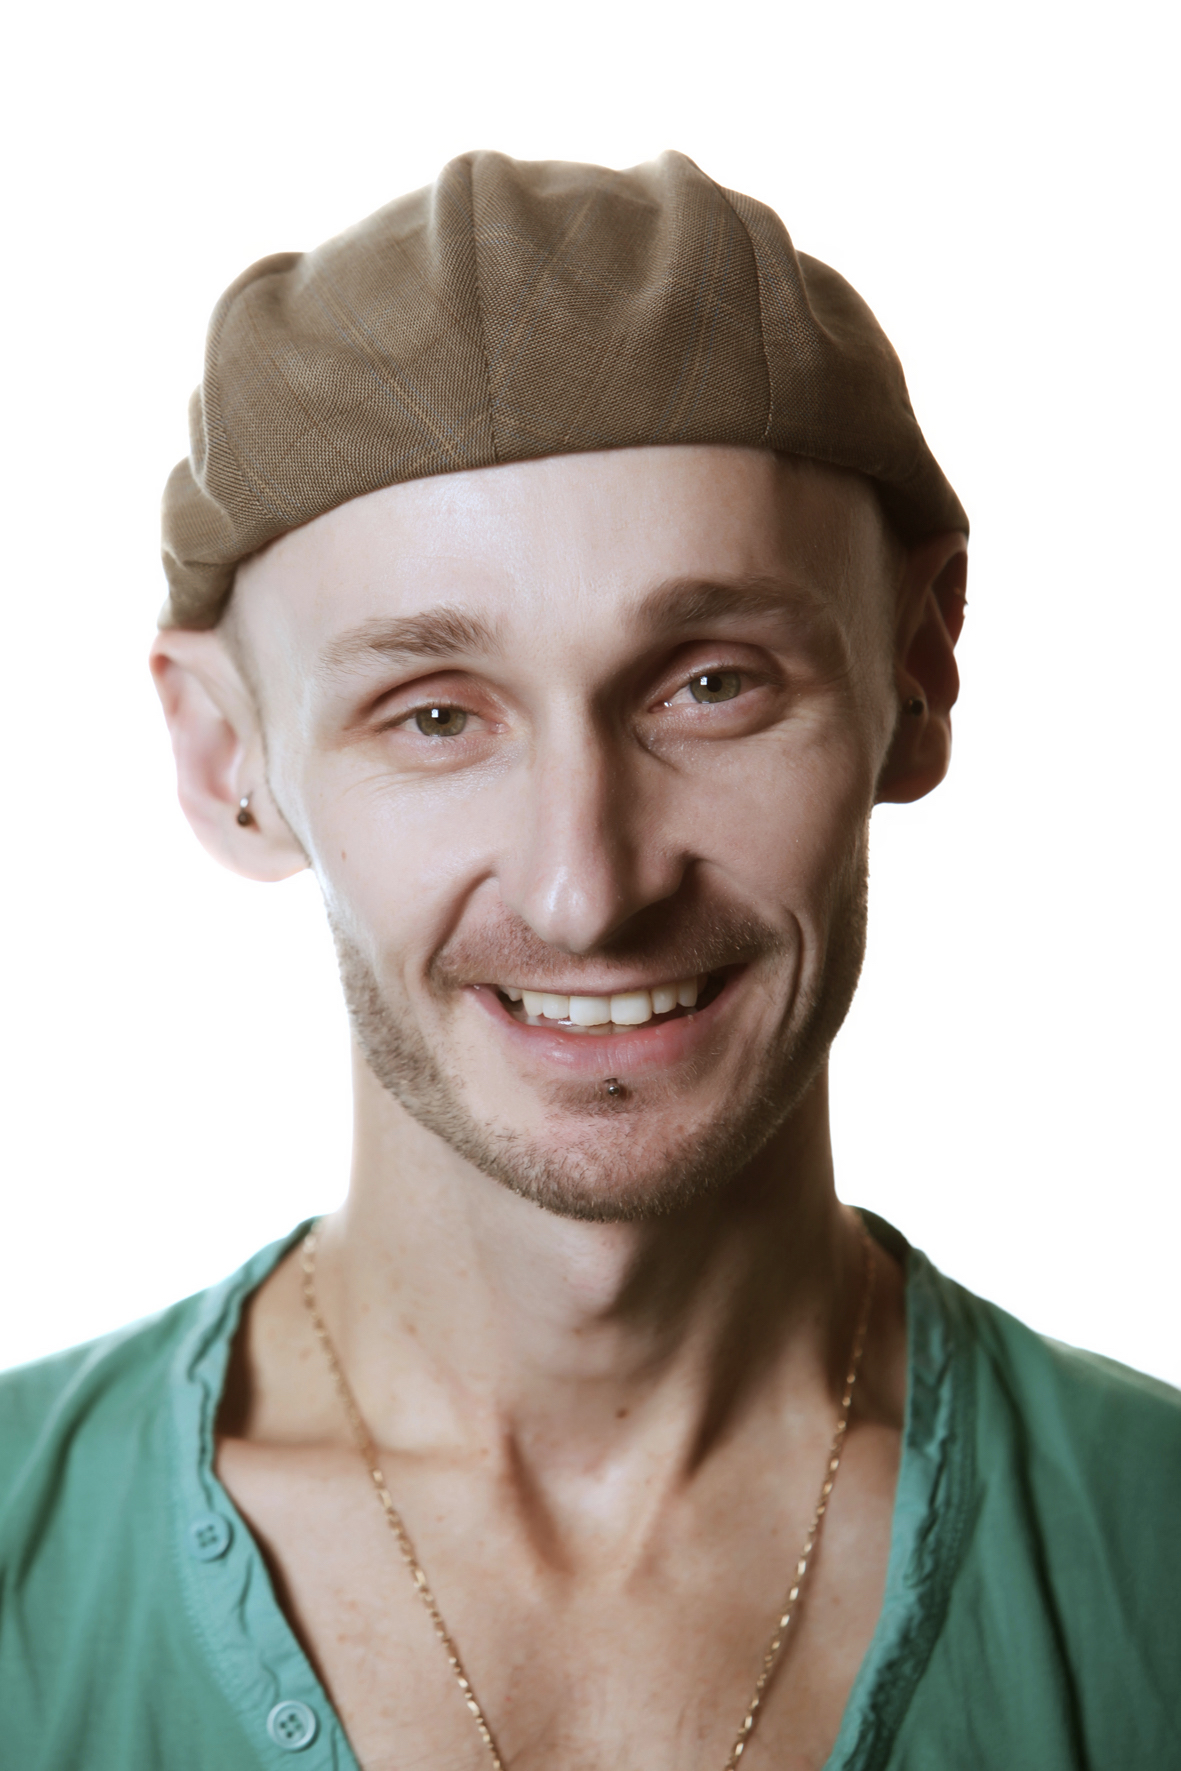 Head shot of Marc Brew; shows the artist from the collarbone up. Marc wears a green v-neck t-shirt, a thin, gold chain, and a warm, brown cap. Marc is smiling and looking directly at the viewer.